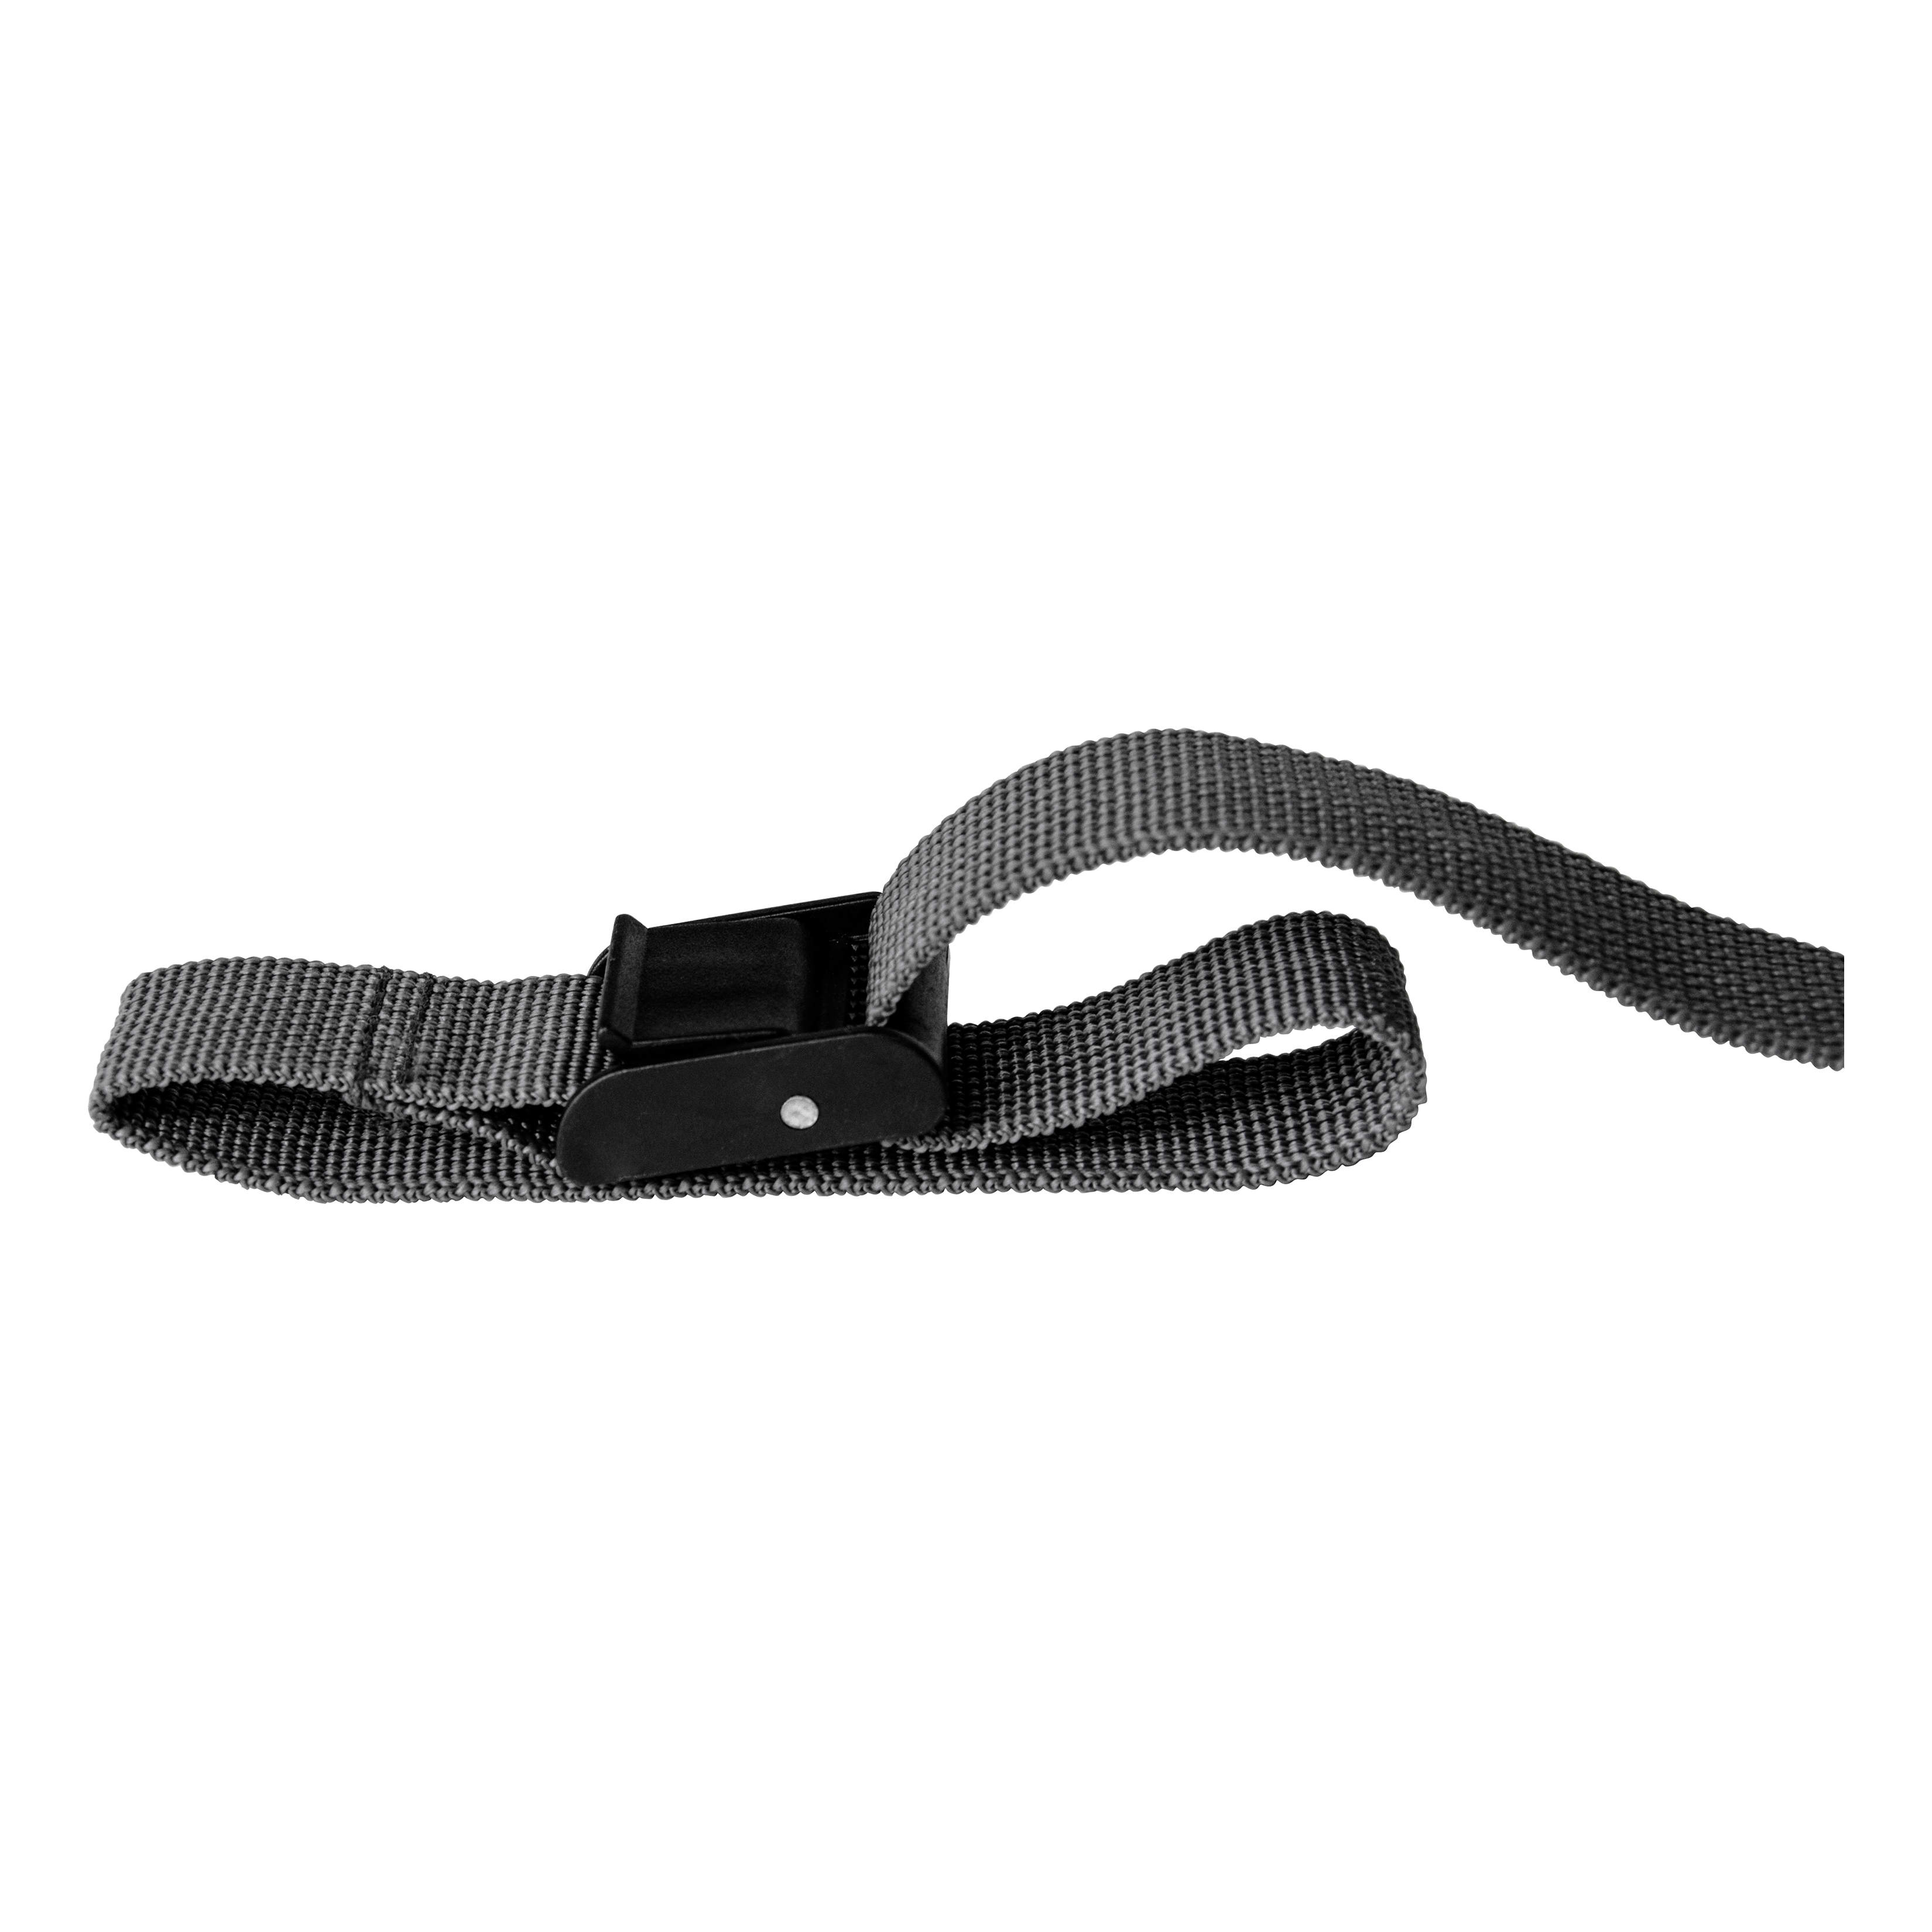 SPYPOINT® FORCE-20 Trail Camera - strap